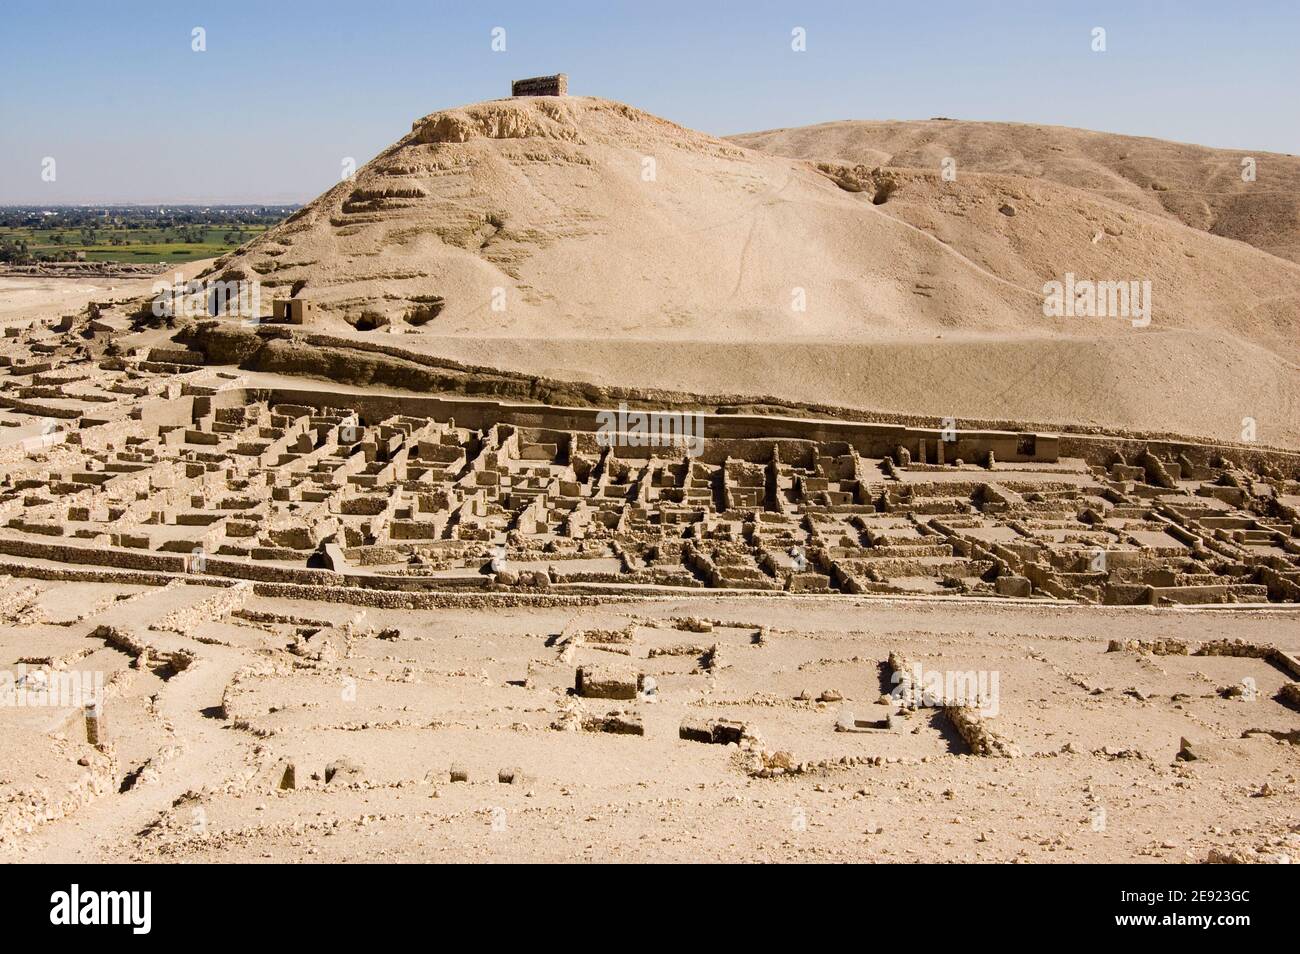 The ruins of the ancient Egyptian workers' village Deir el Medina on the West Bank of the Nile at Luxor, Egypt. Ancient ruin, over 1000 years old. Stock Photo